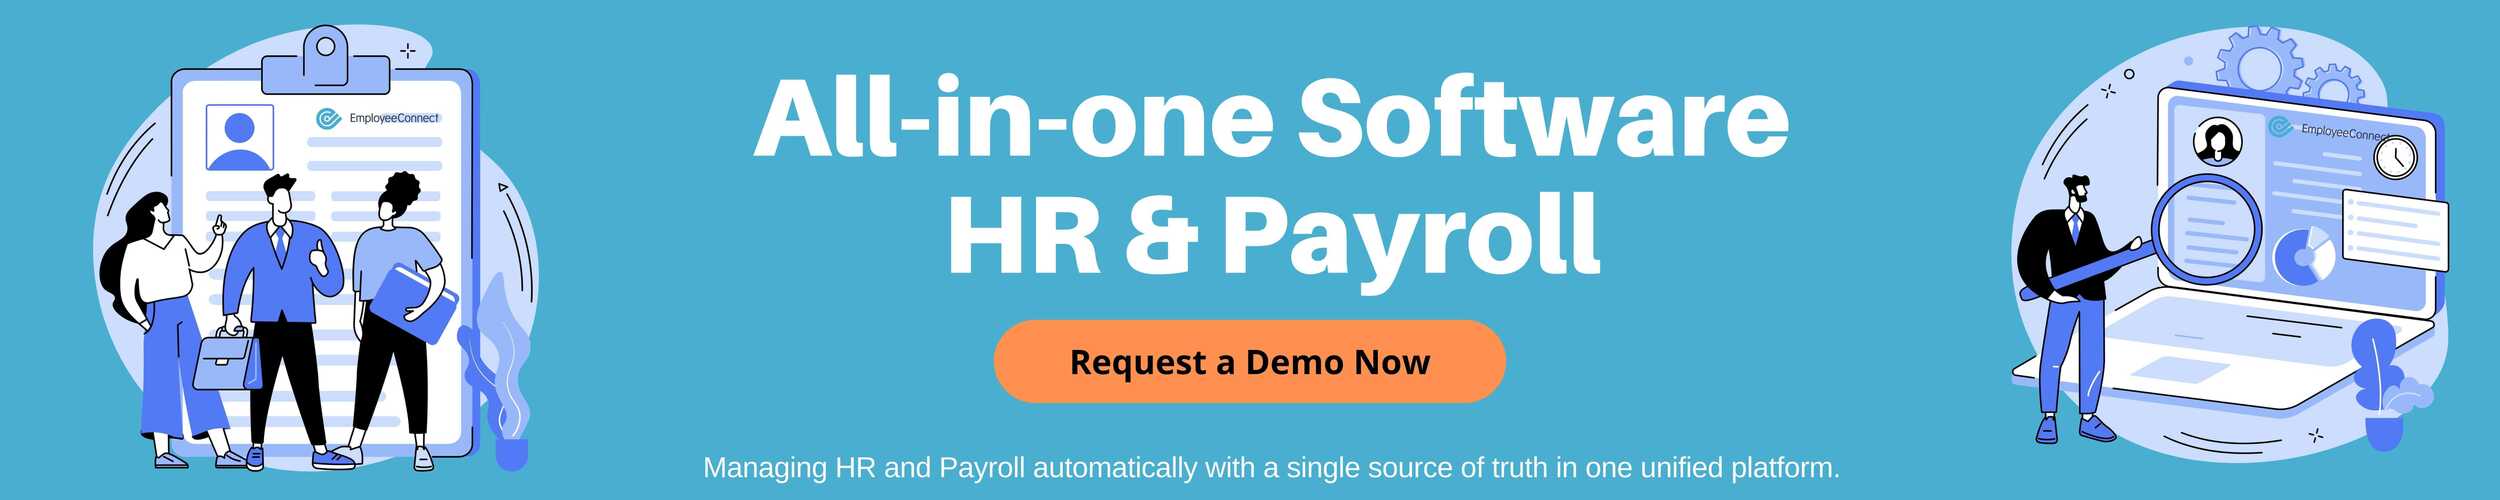 hr software and payroll